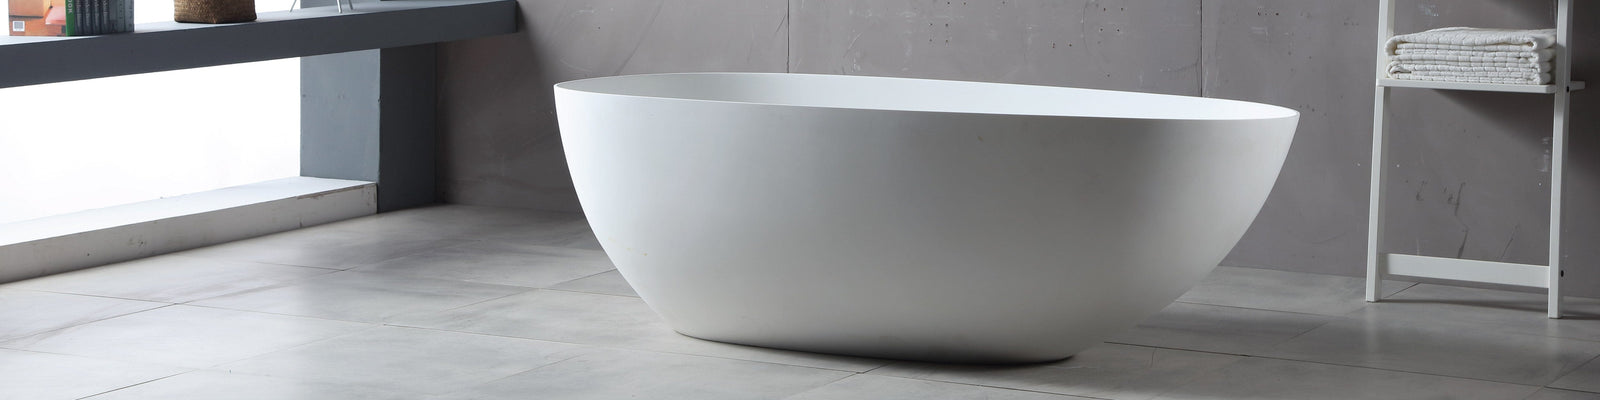 Small Freestanding Double Ended Bath 1300 x 715mm - Pico - Furniture123